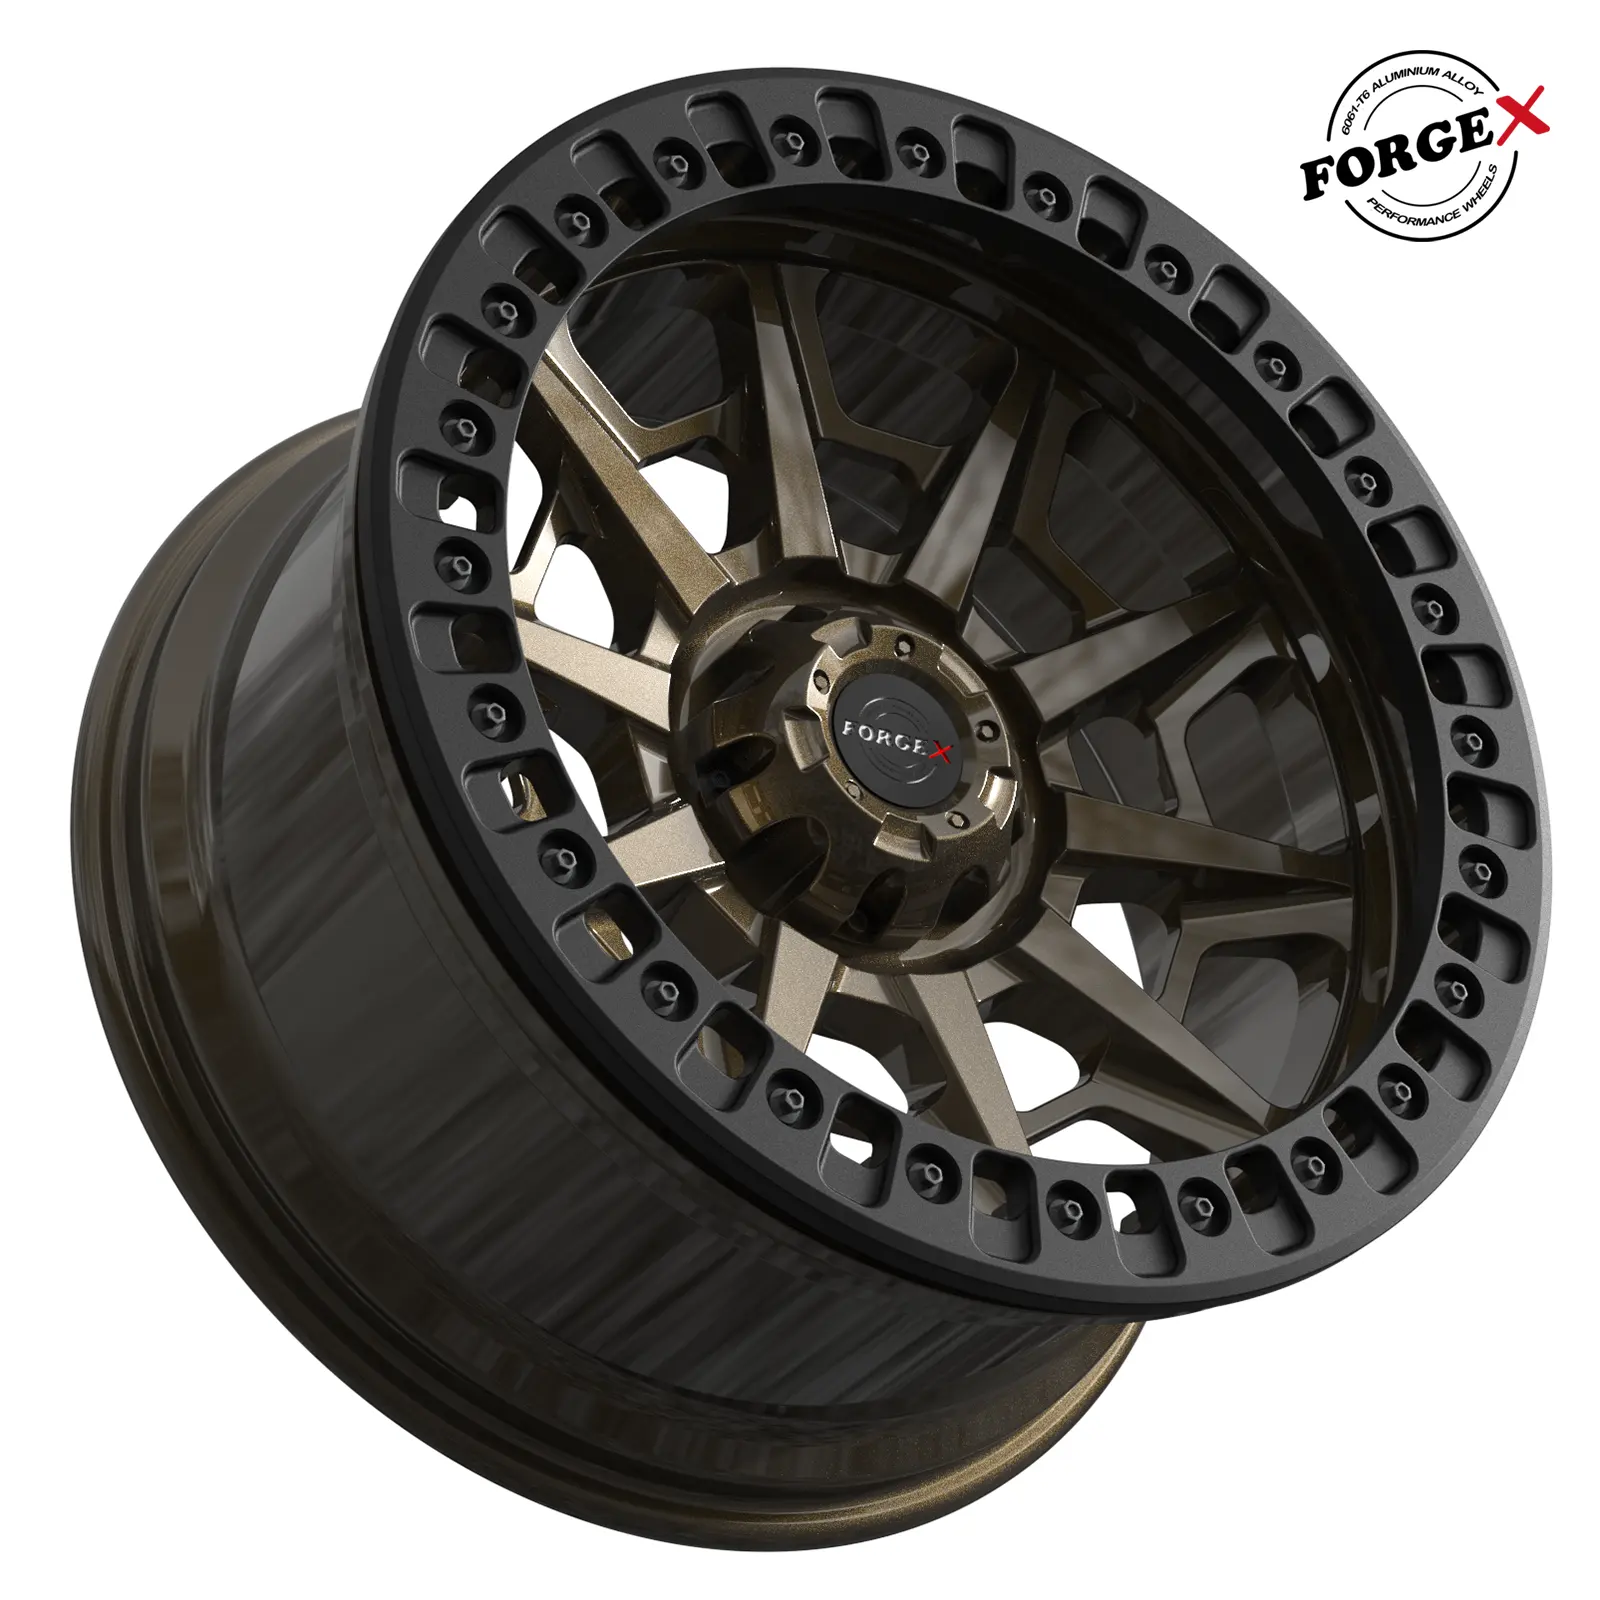 Customizable 17-22 Inch Concave Forged Wheels 5x139.7   6x139.7 4x4 off Road Alloy Rims with Real Beadlock Spokes Design